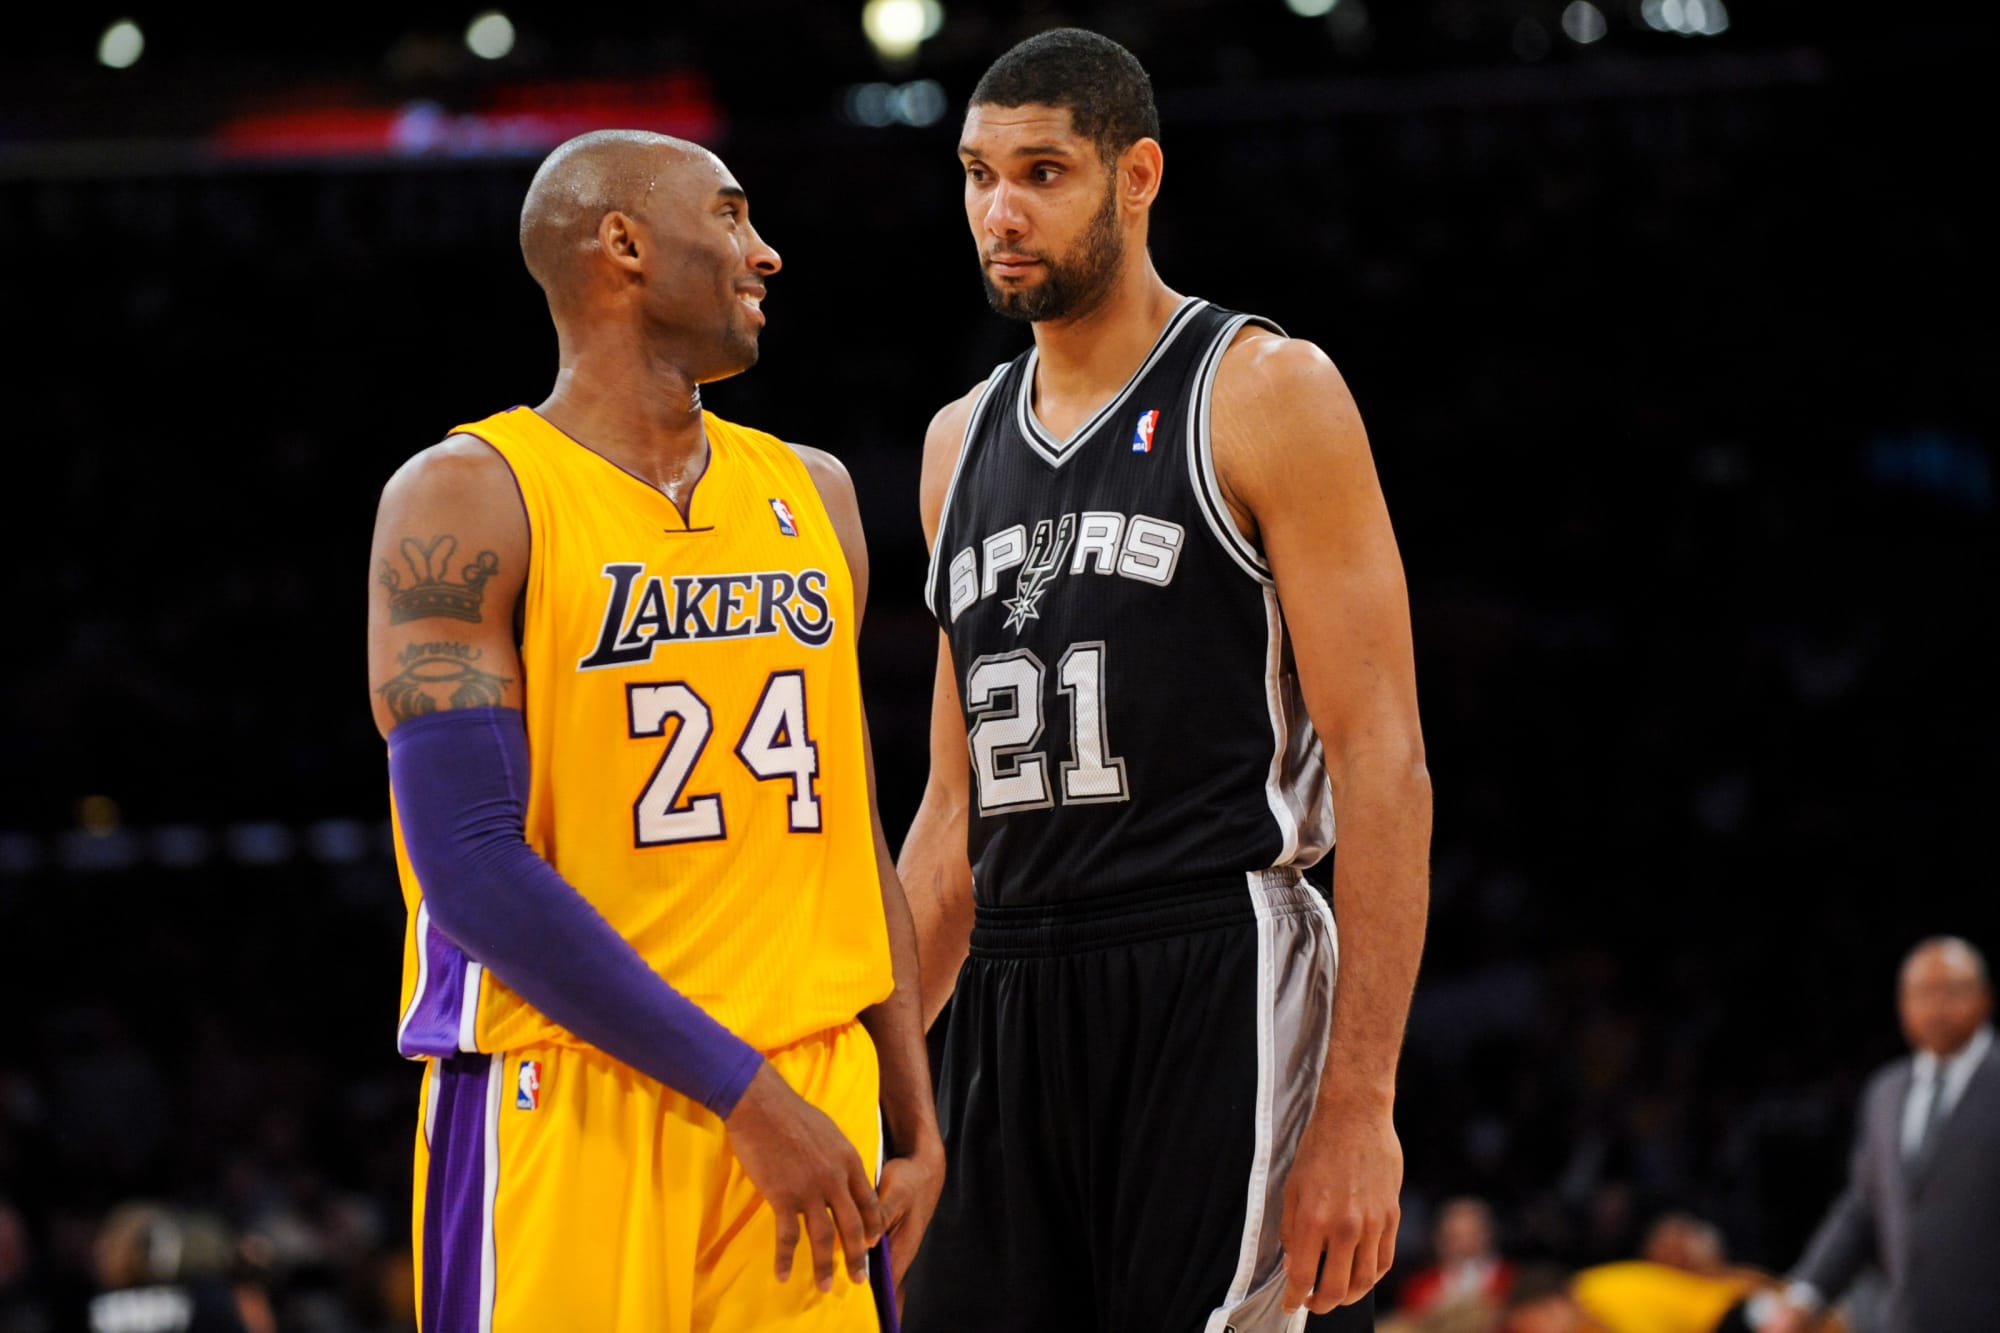 The Spurs And Lakers Rivalry Relived Through Texas Eyes